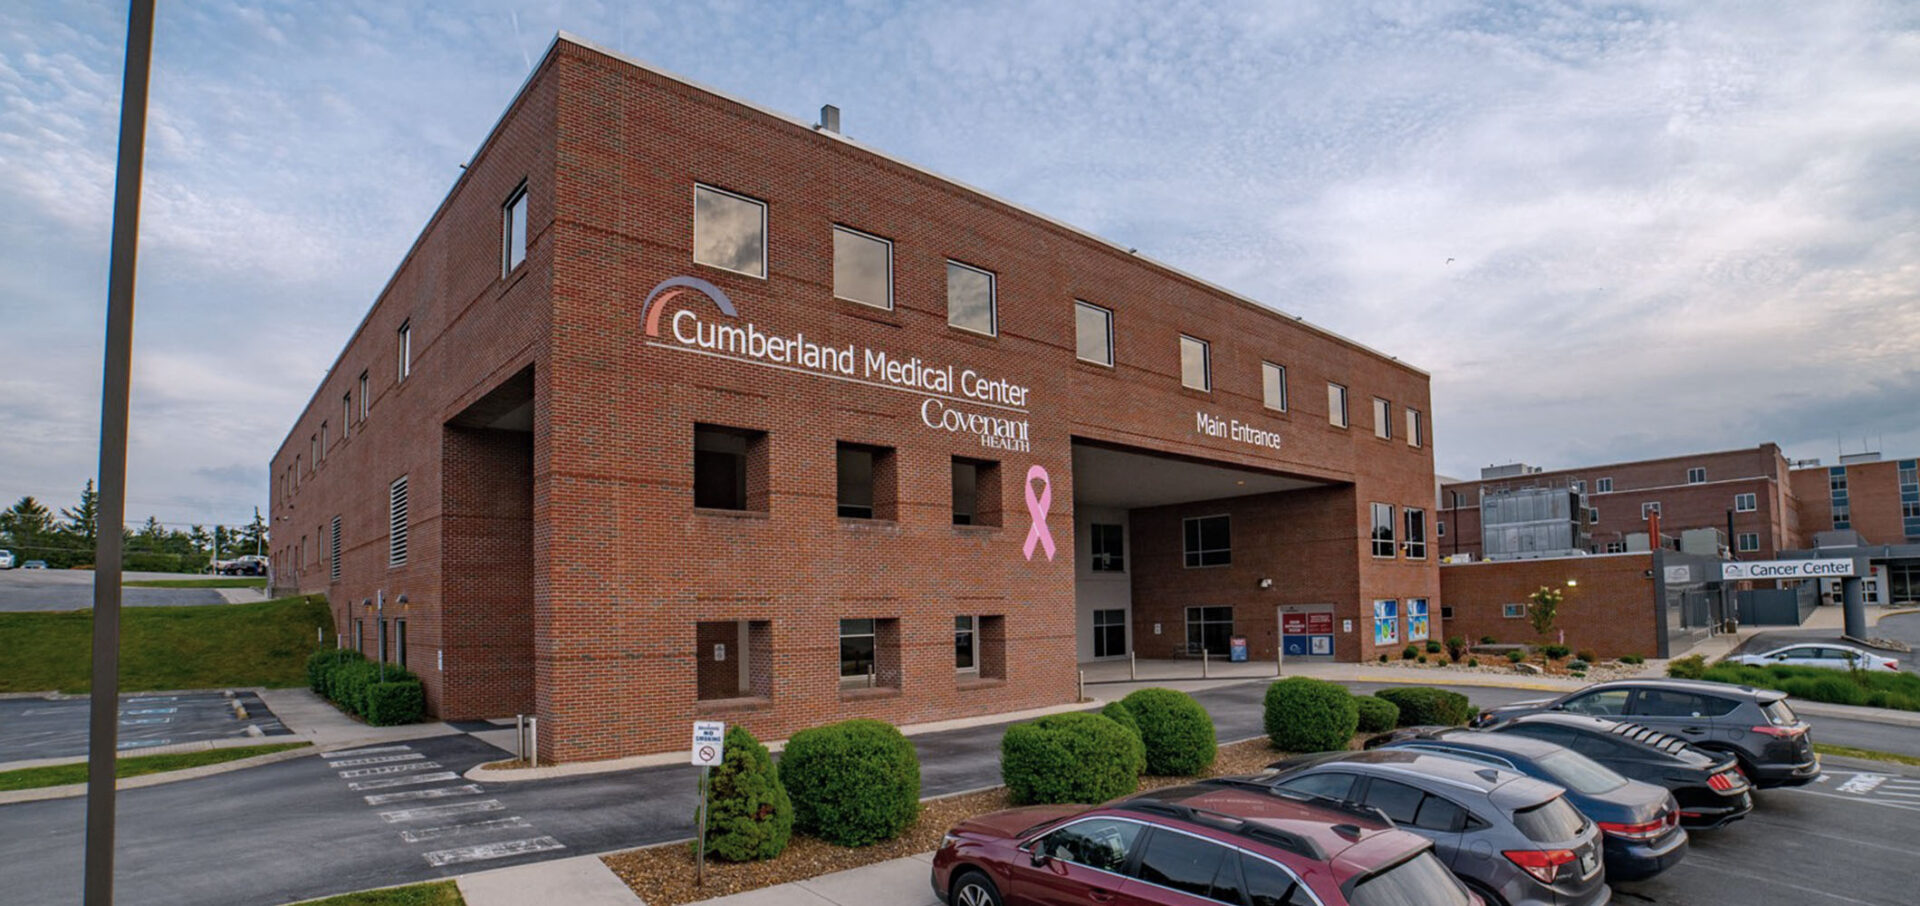 Welcome to Cumberland Medical Center image